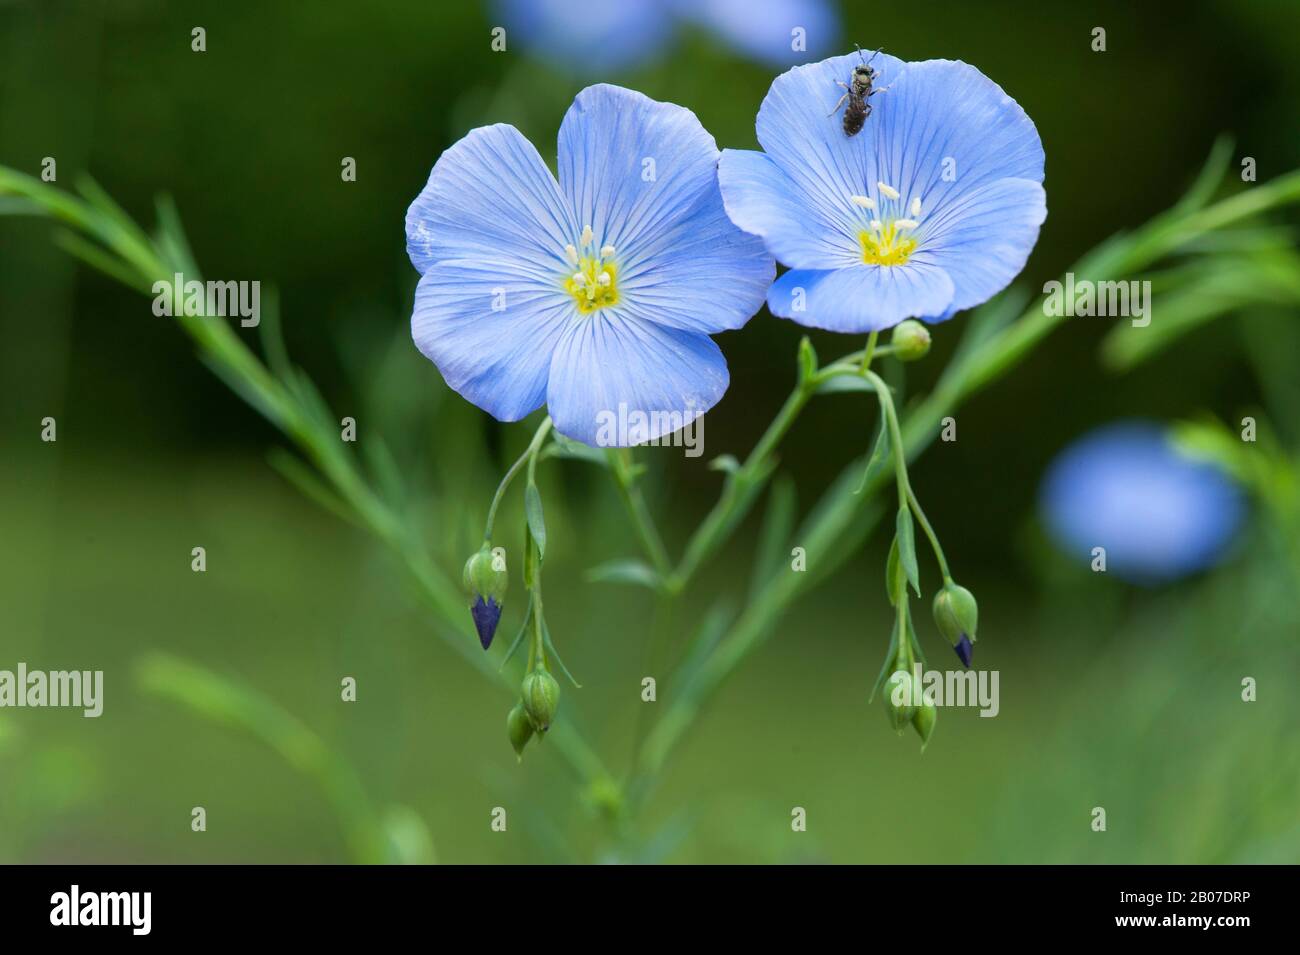 Perennial flax, Blue flax (Linum perenne), blooming, Germany Stock Photo